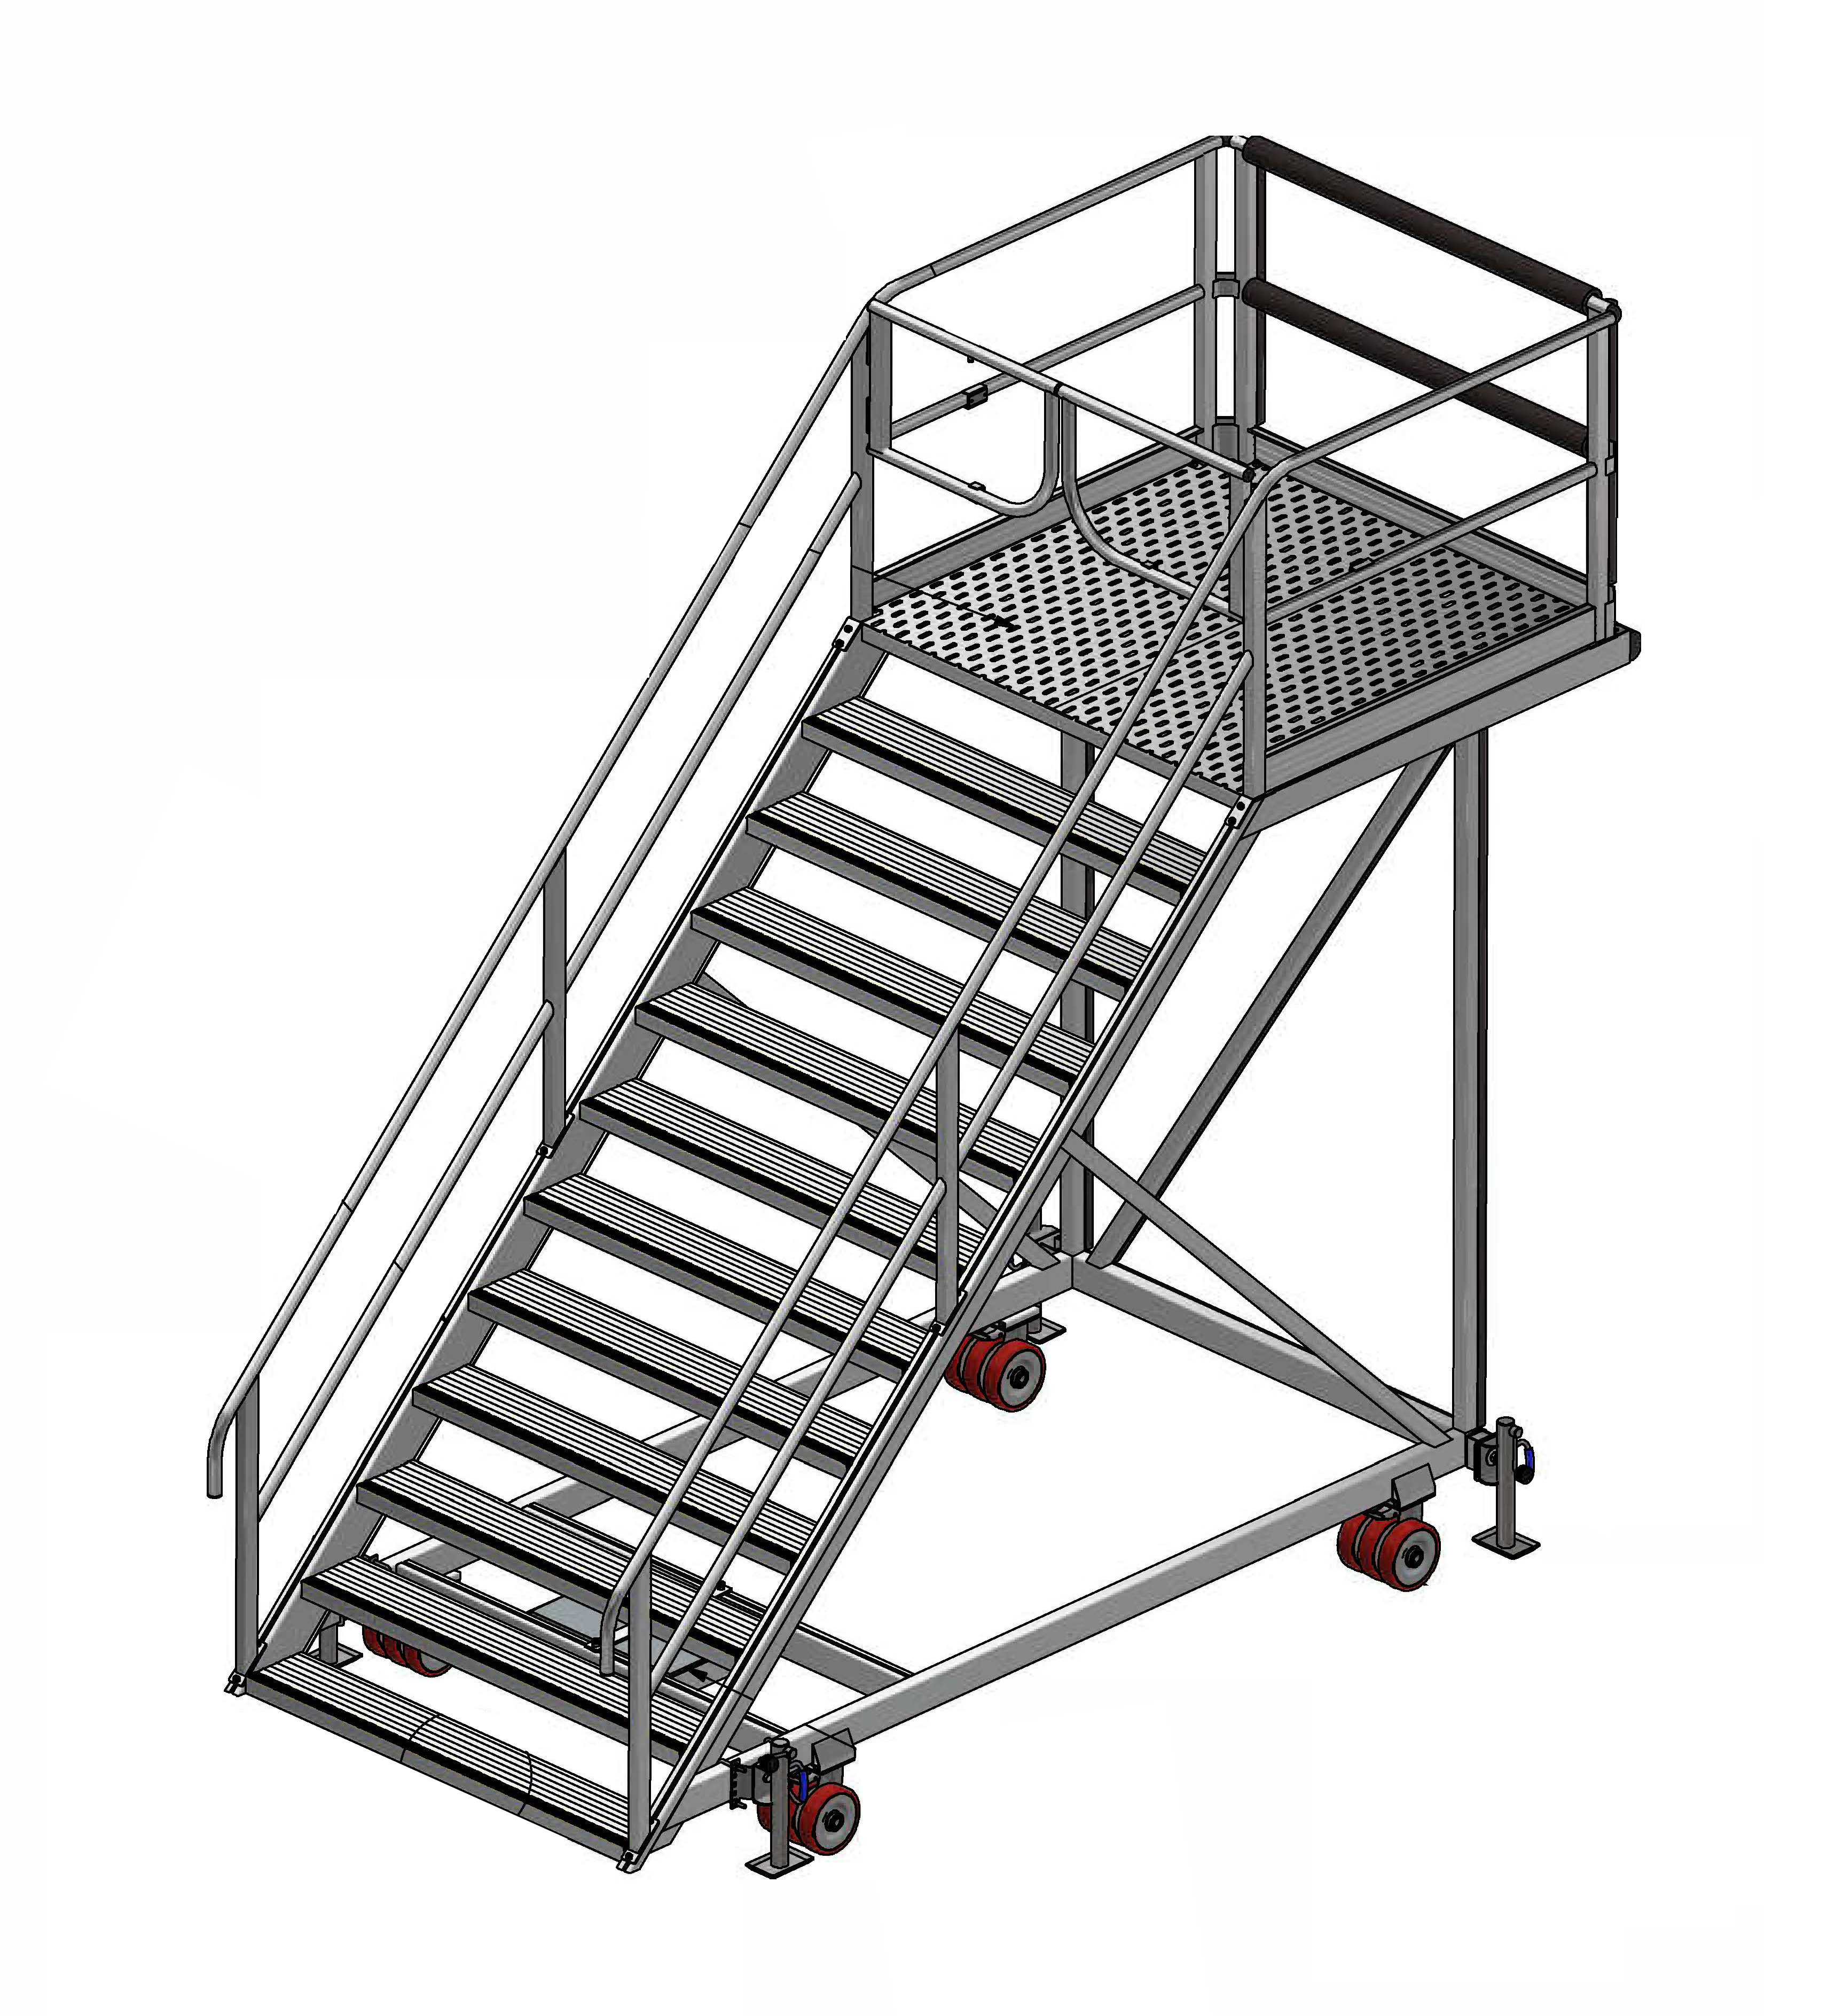 Cable Installation Access Platform for Train Manufacturing